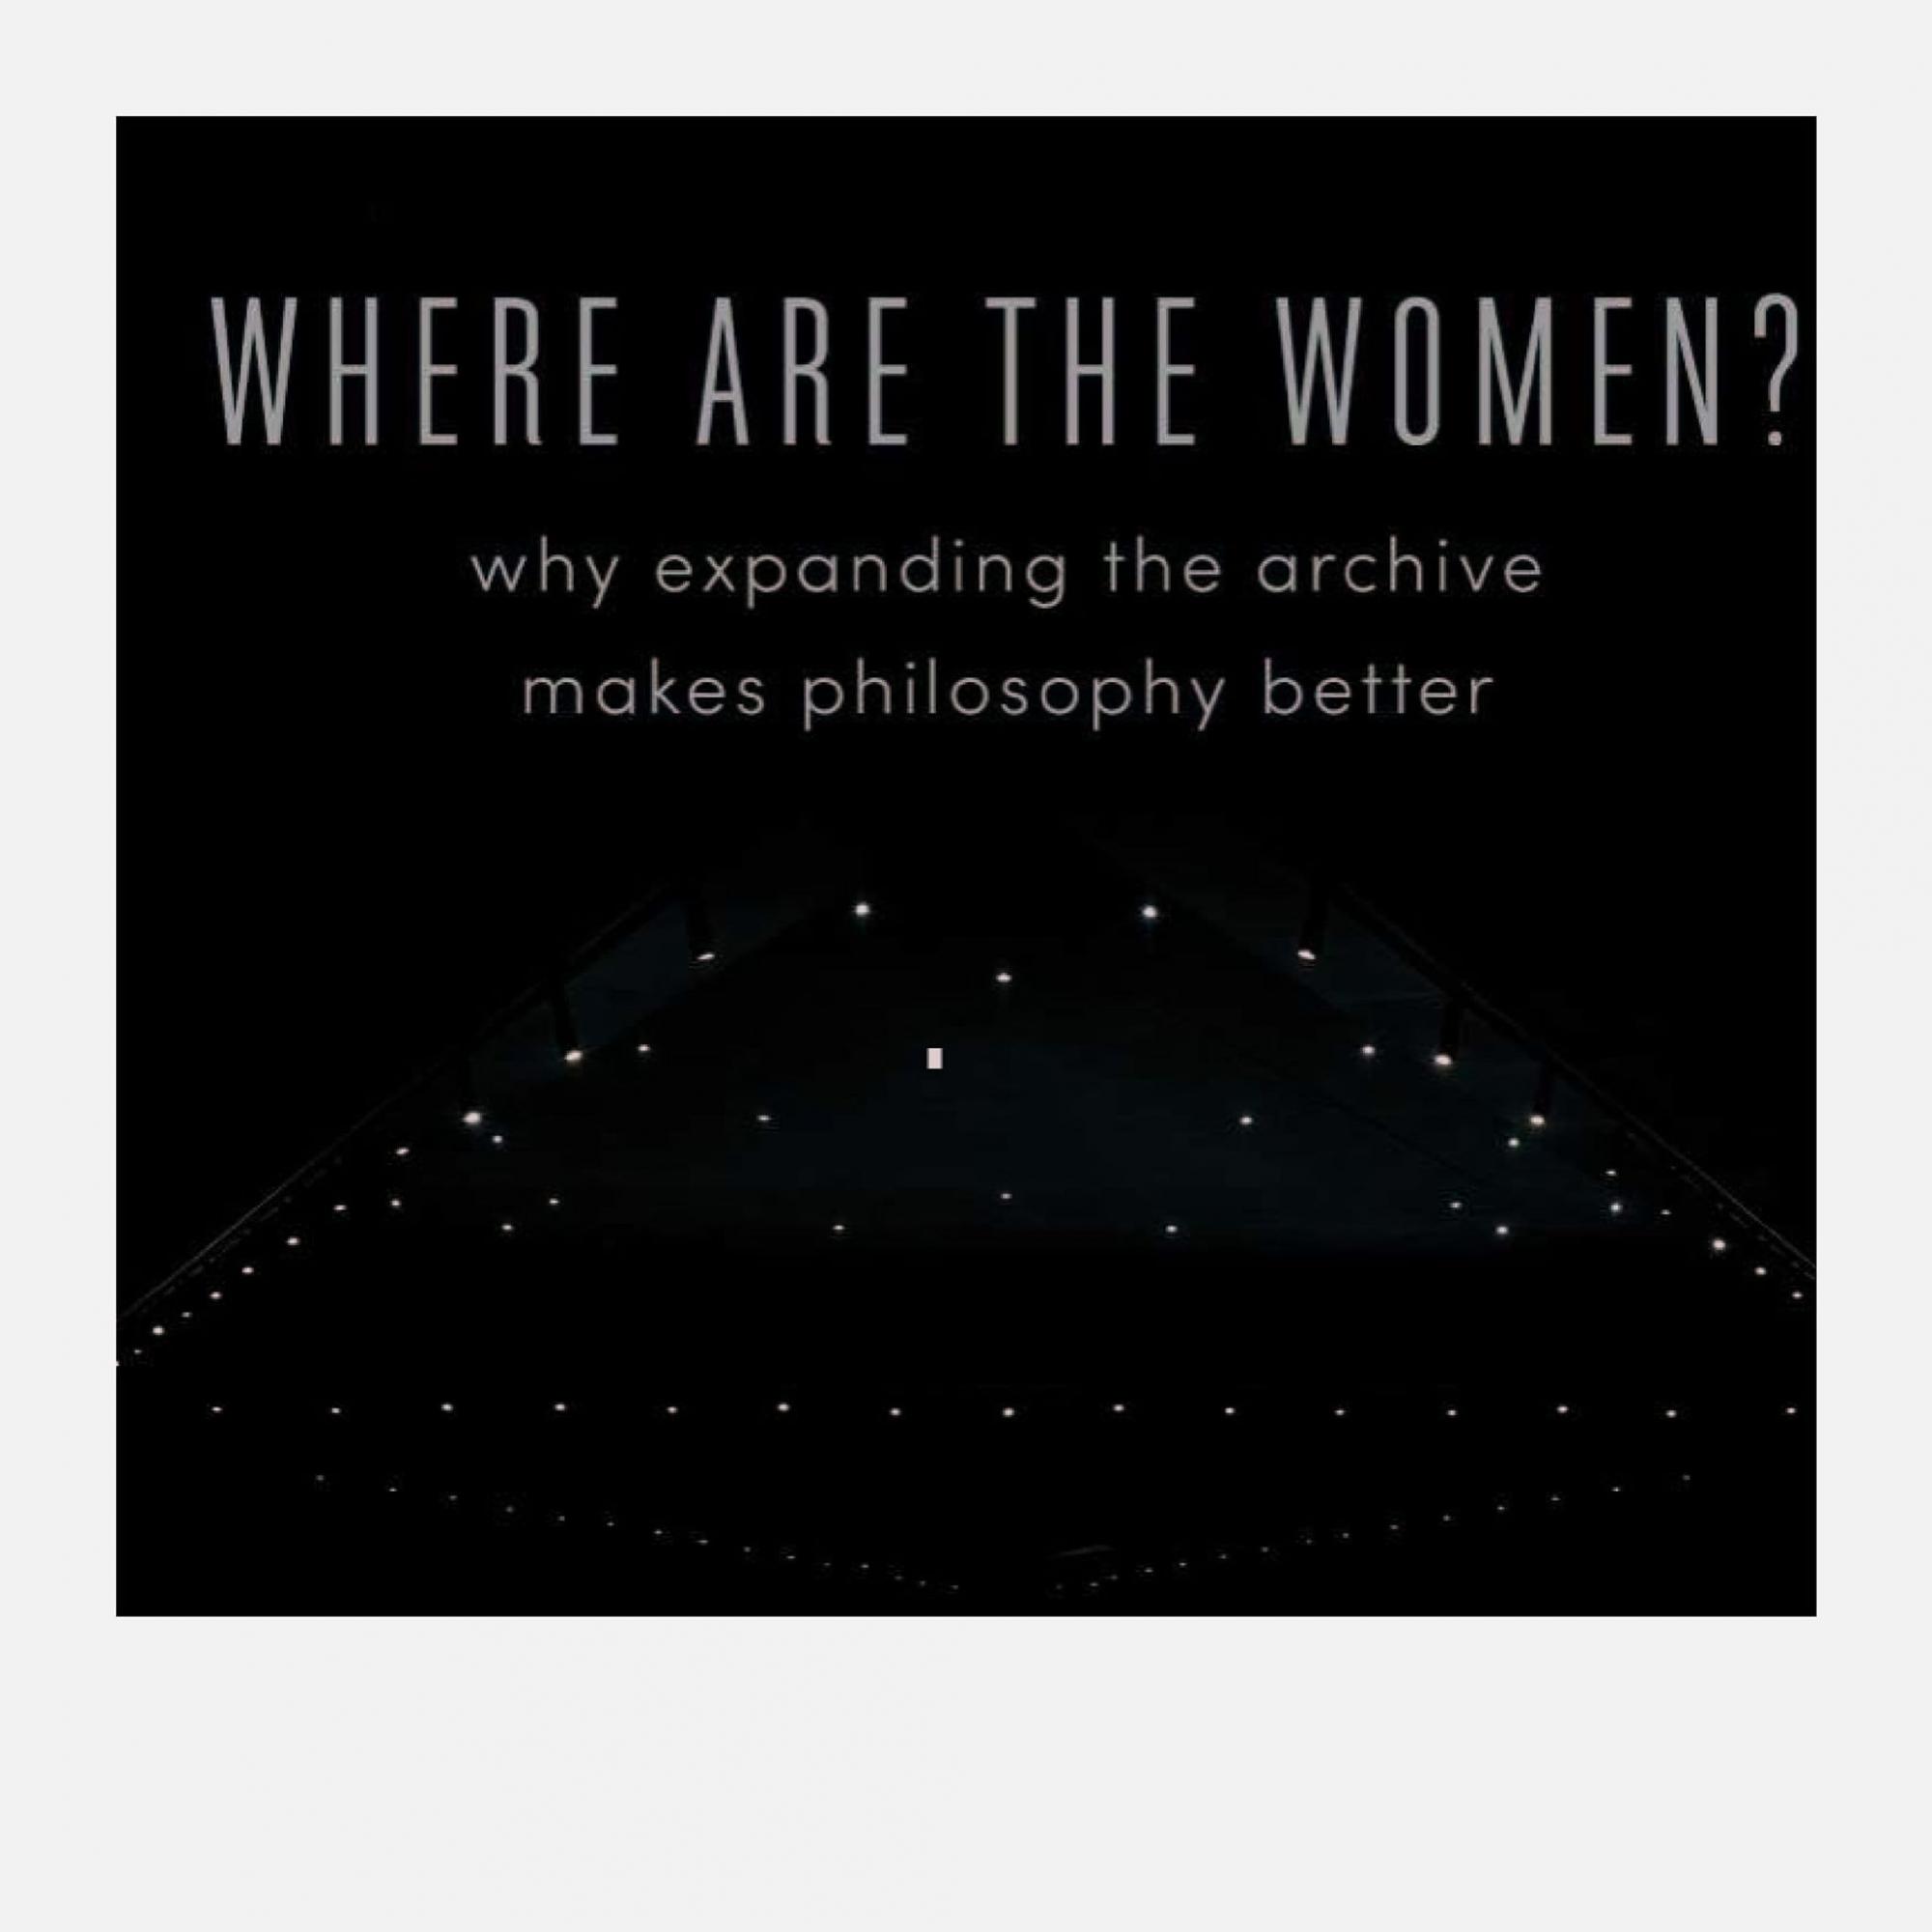 Where Are the Women? - Blog Post discussing Dr. Tyson's new book!